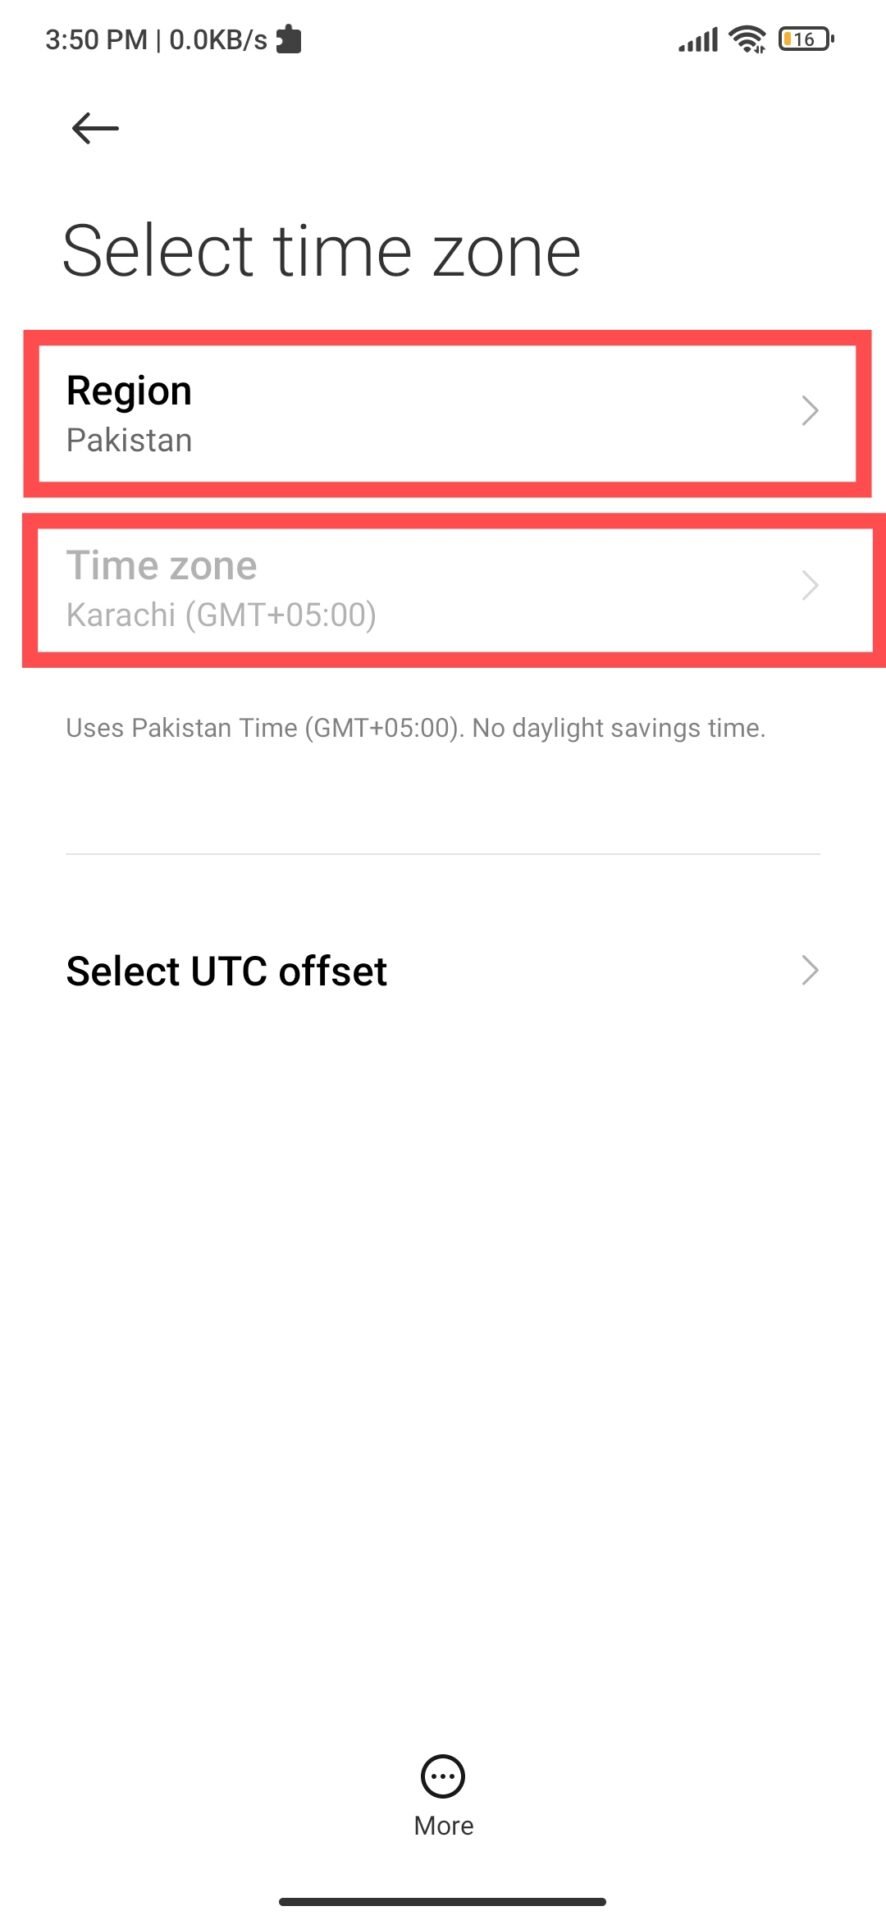 Select Region and Correct Time Zone